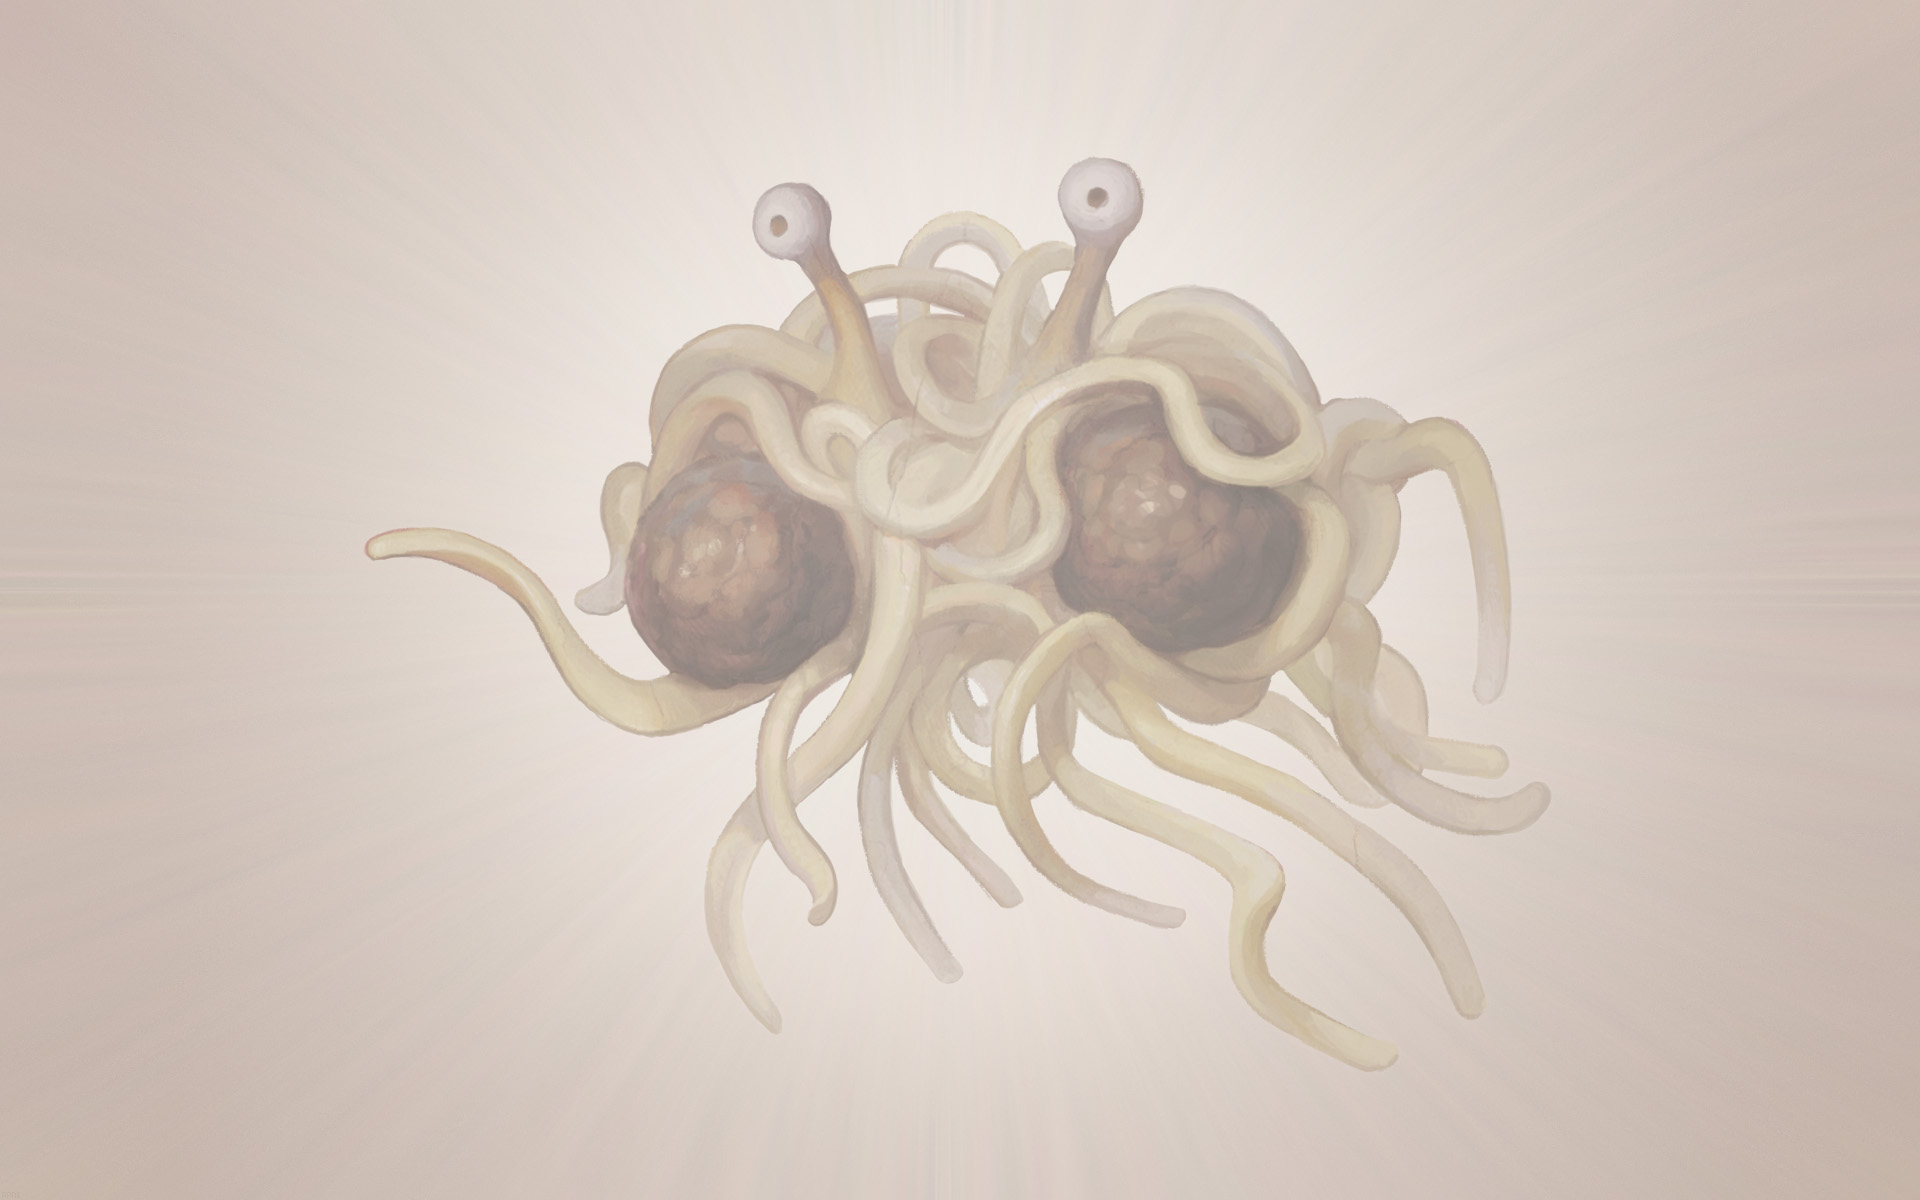 In Distress Inmate Denied Right To Worship Flying Spaghetti Monster